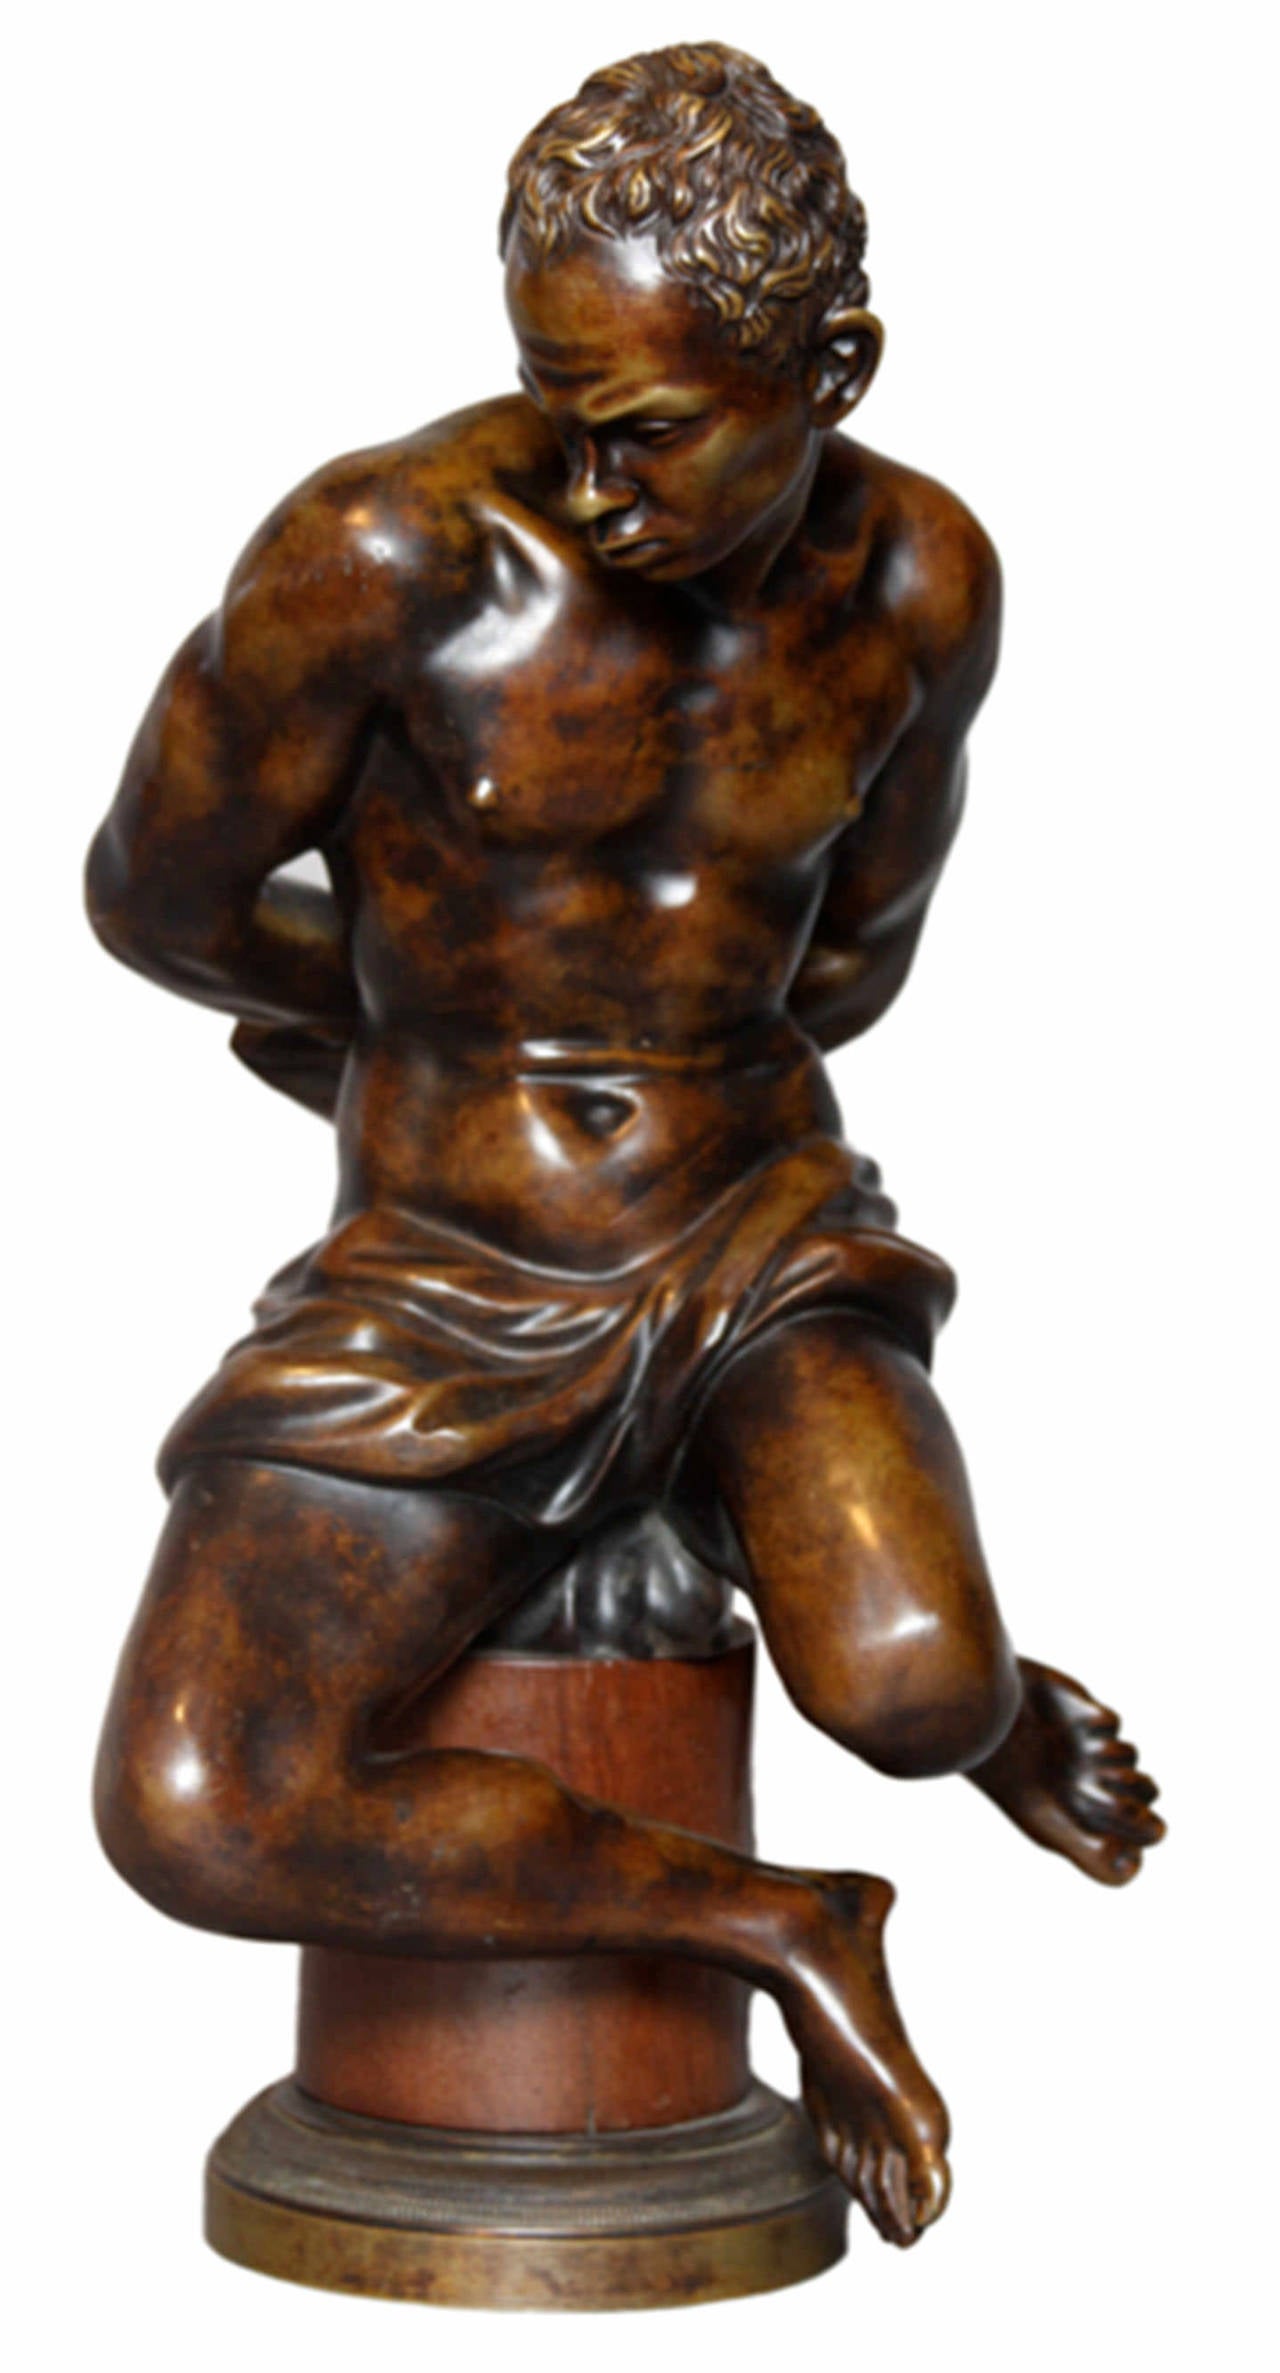 Bronze with reddish brown patination

16 in. h. overall